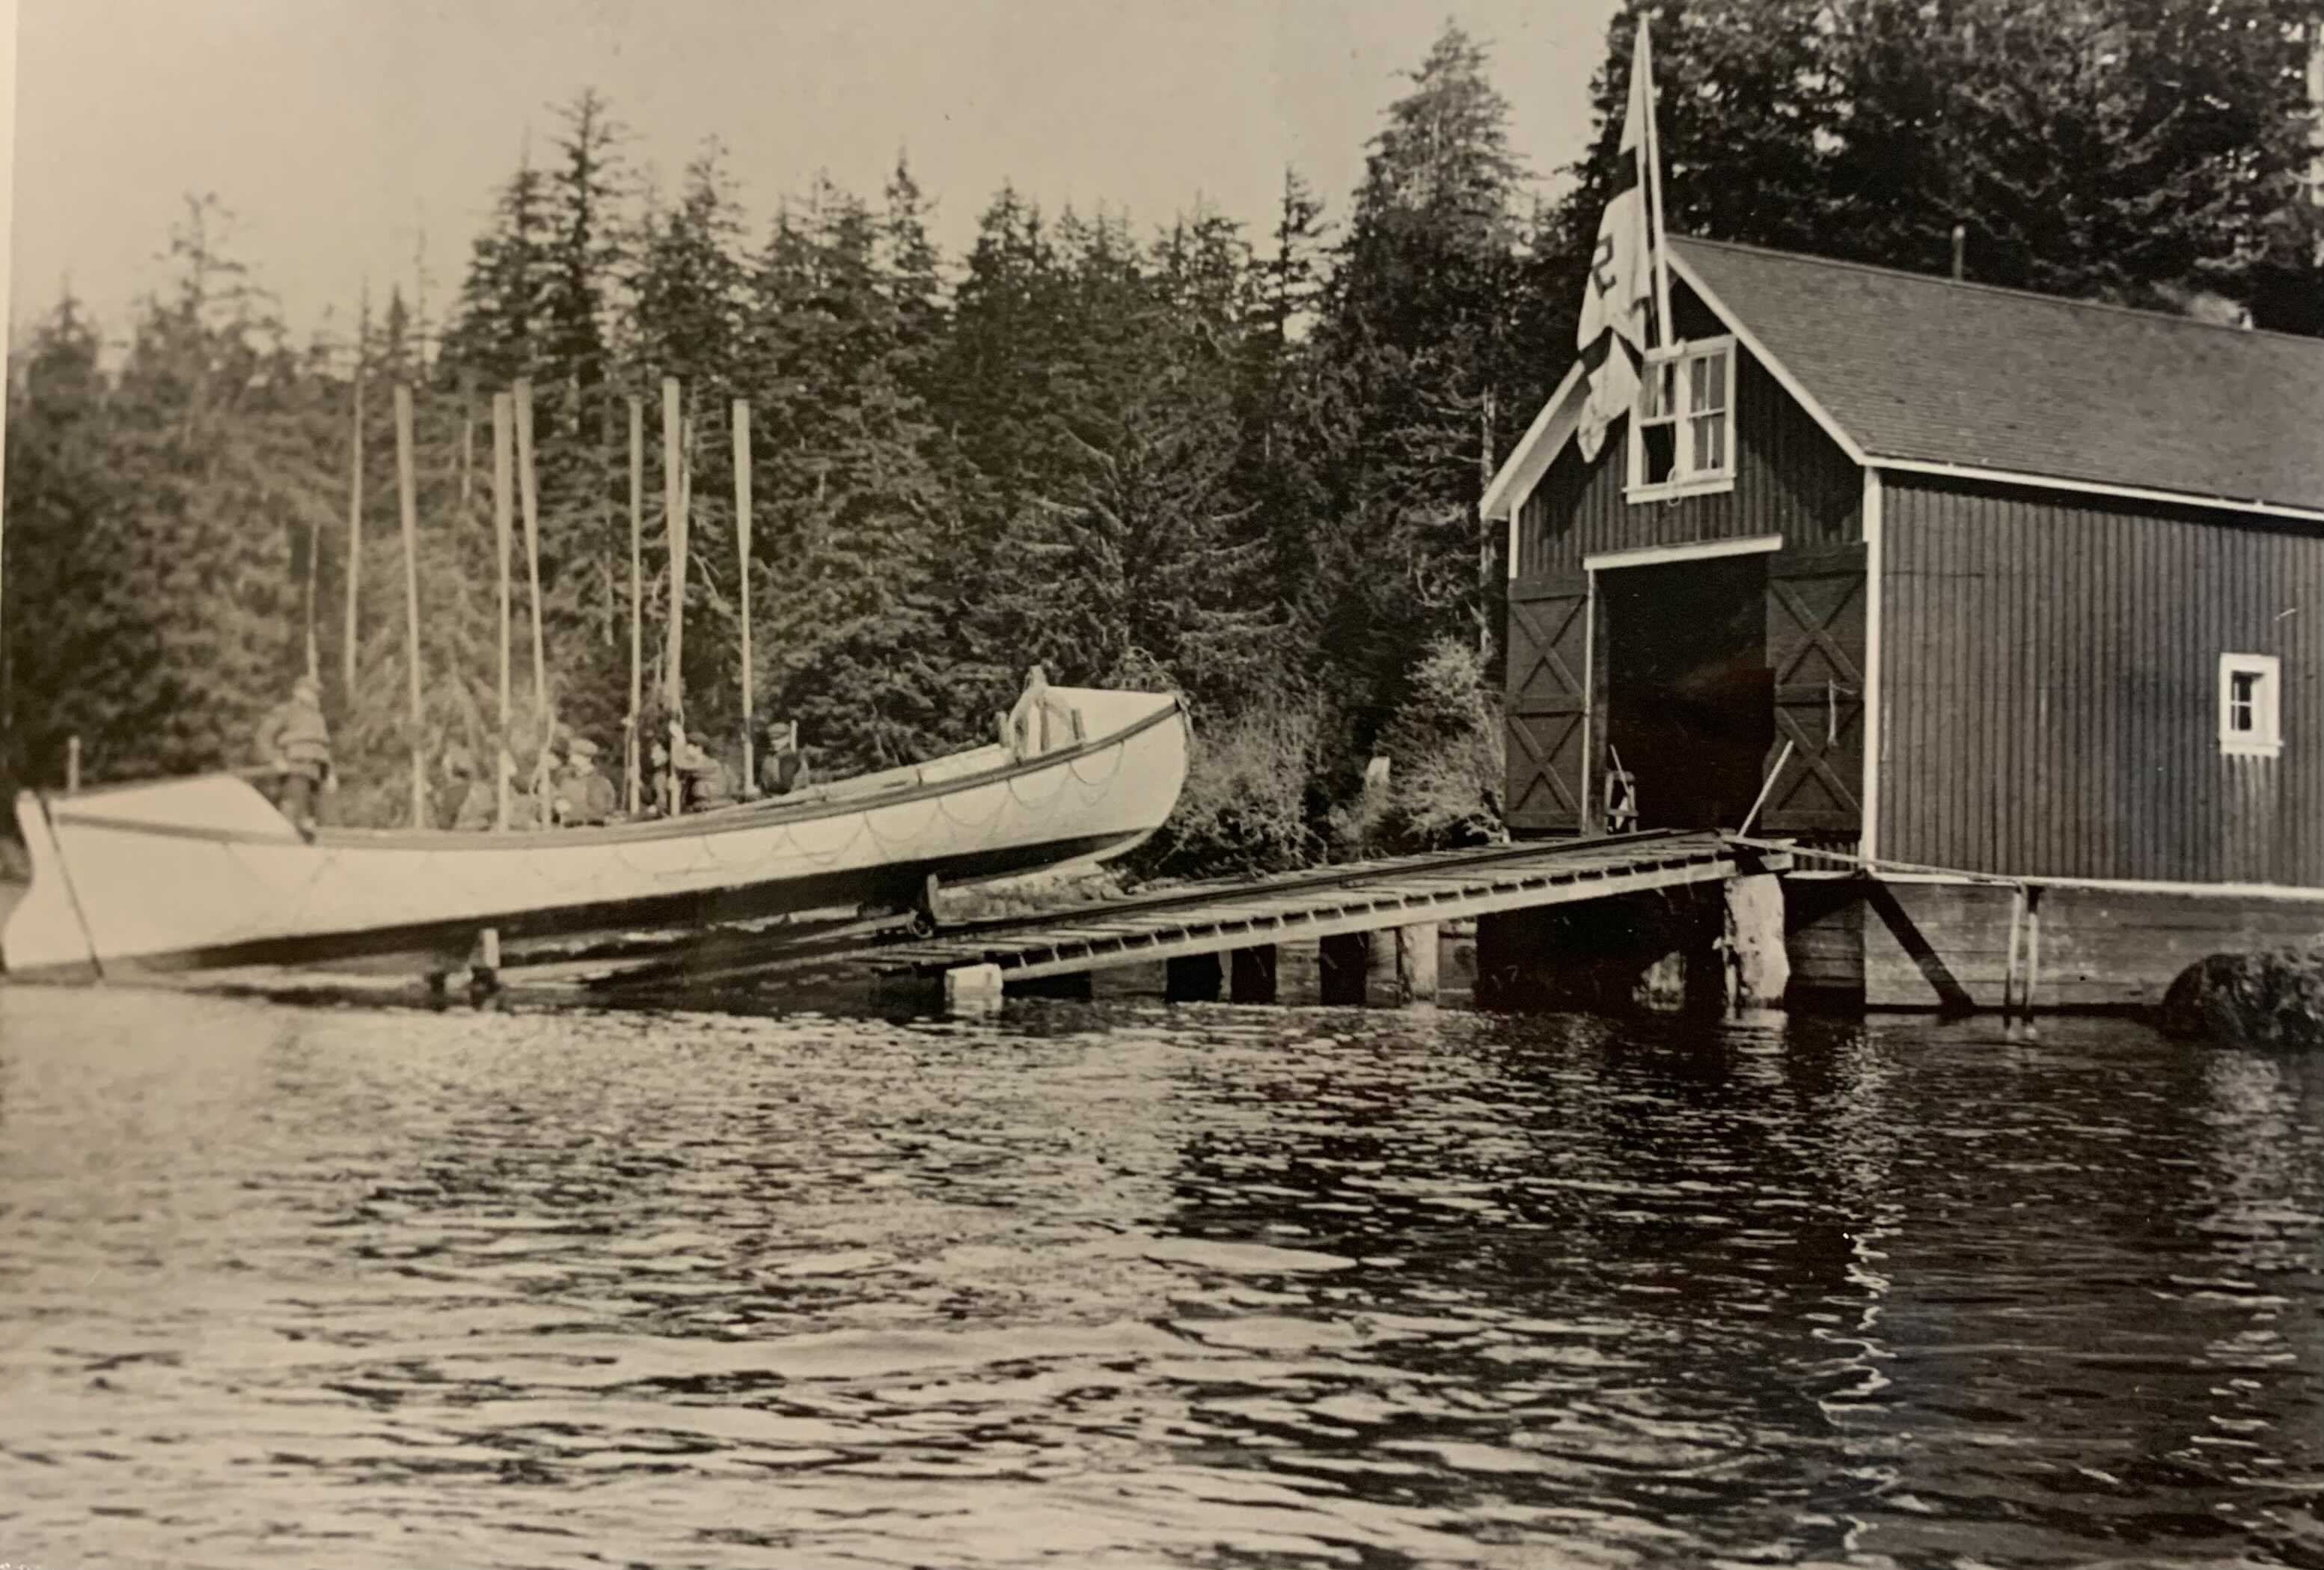 A photo of the Ucluelet Life Saving Station, crew, and boat circa 1935.